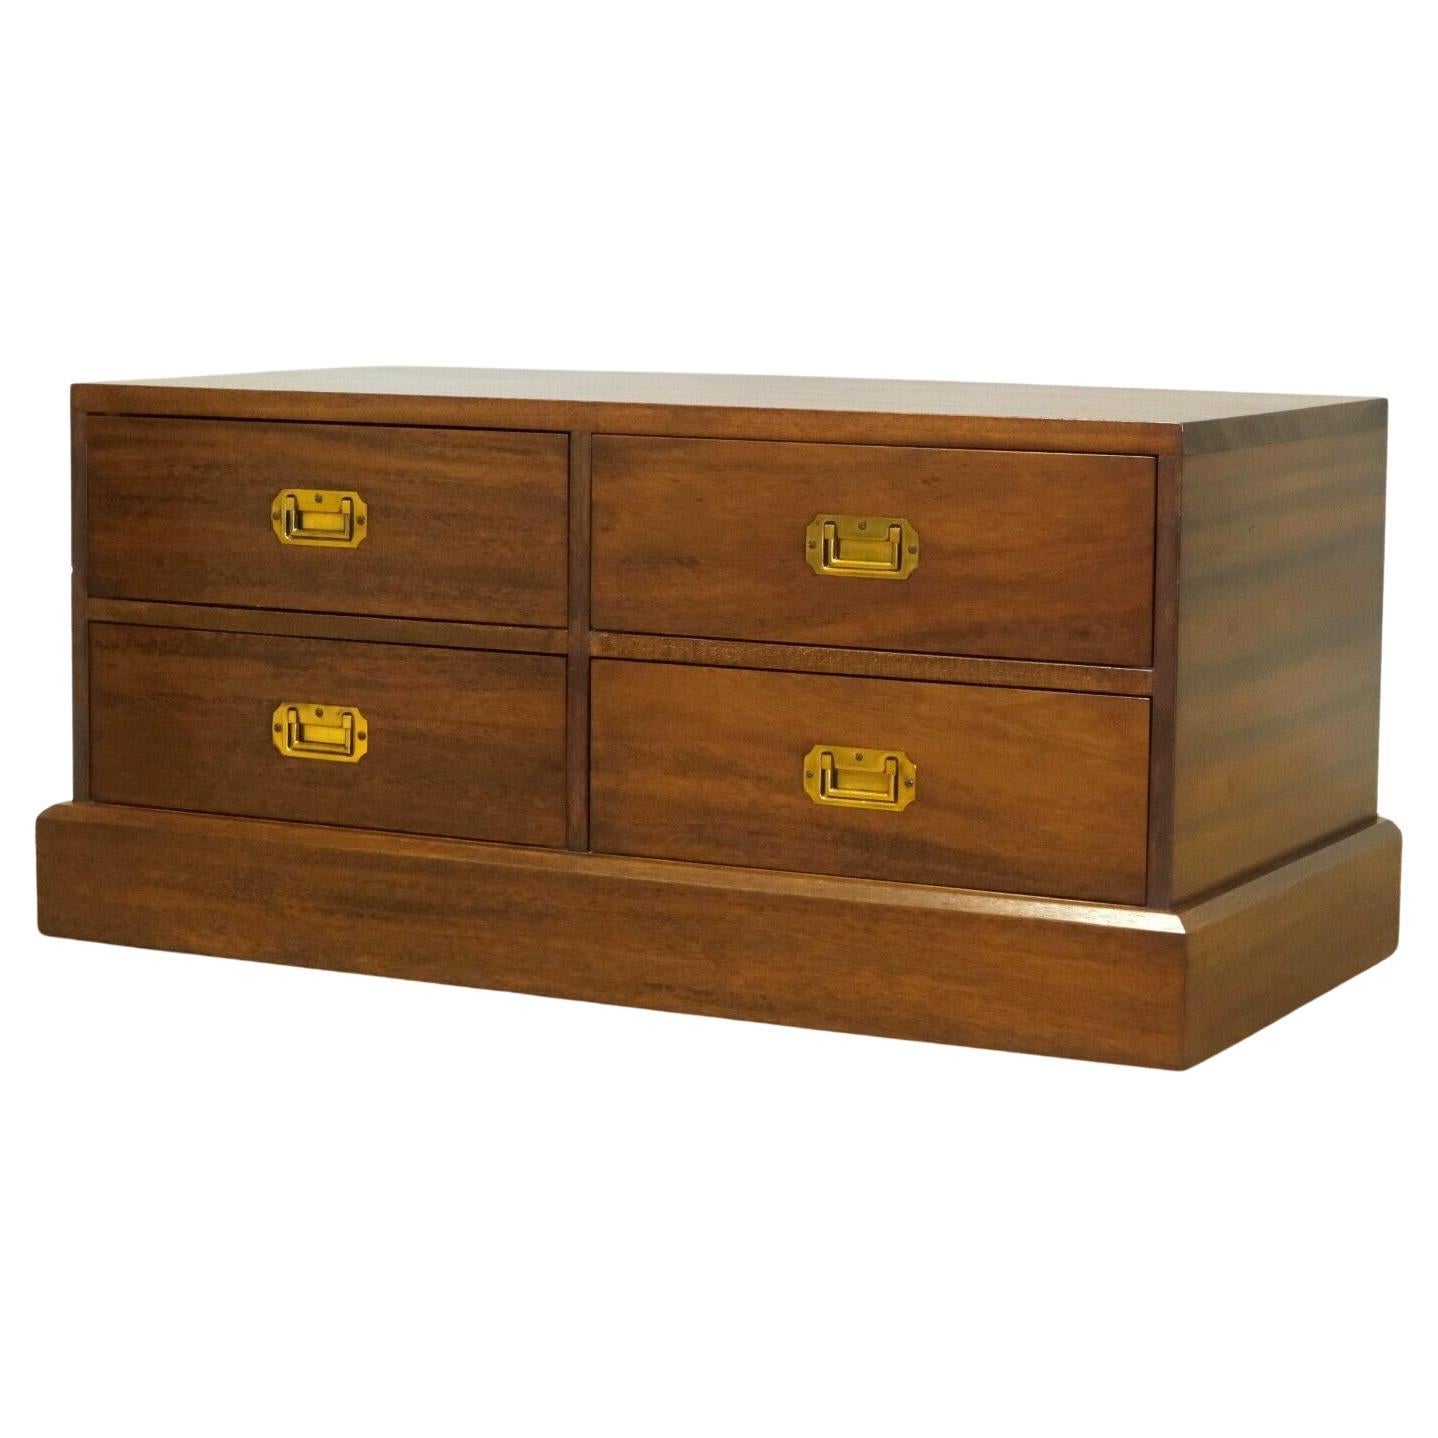 MiLITARY CAMPAIGN STYLE BROWN MAHOGANY CHEST/TV STAND For Sale